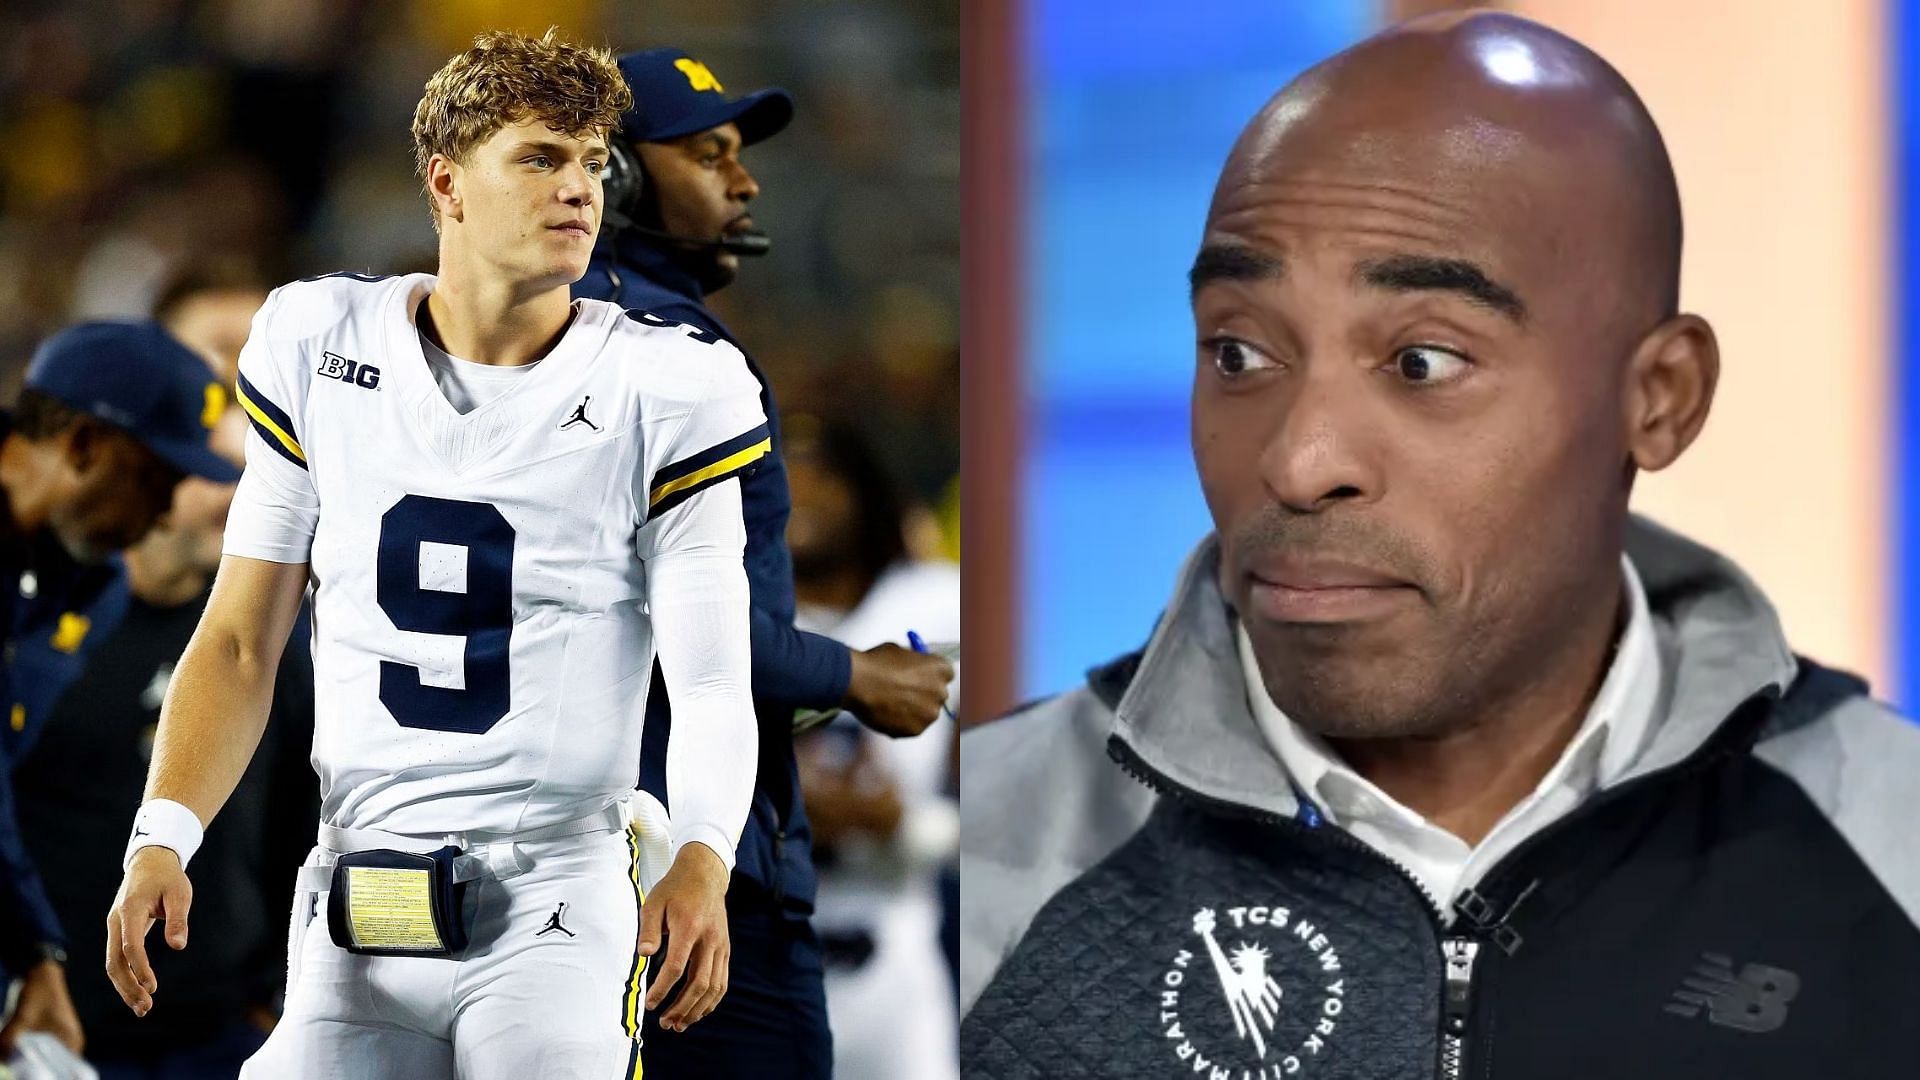 Tiki Barber believes JJ McCarthy is not worthy of being a first-round pick